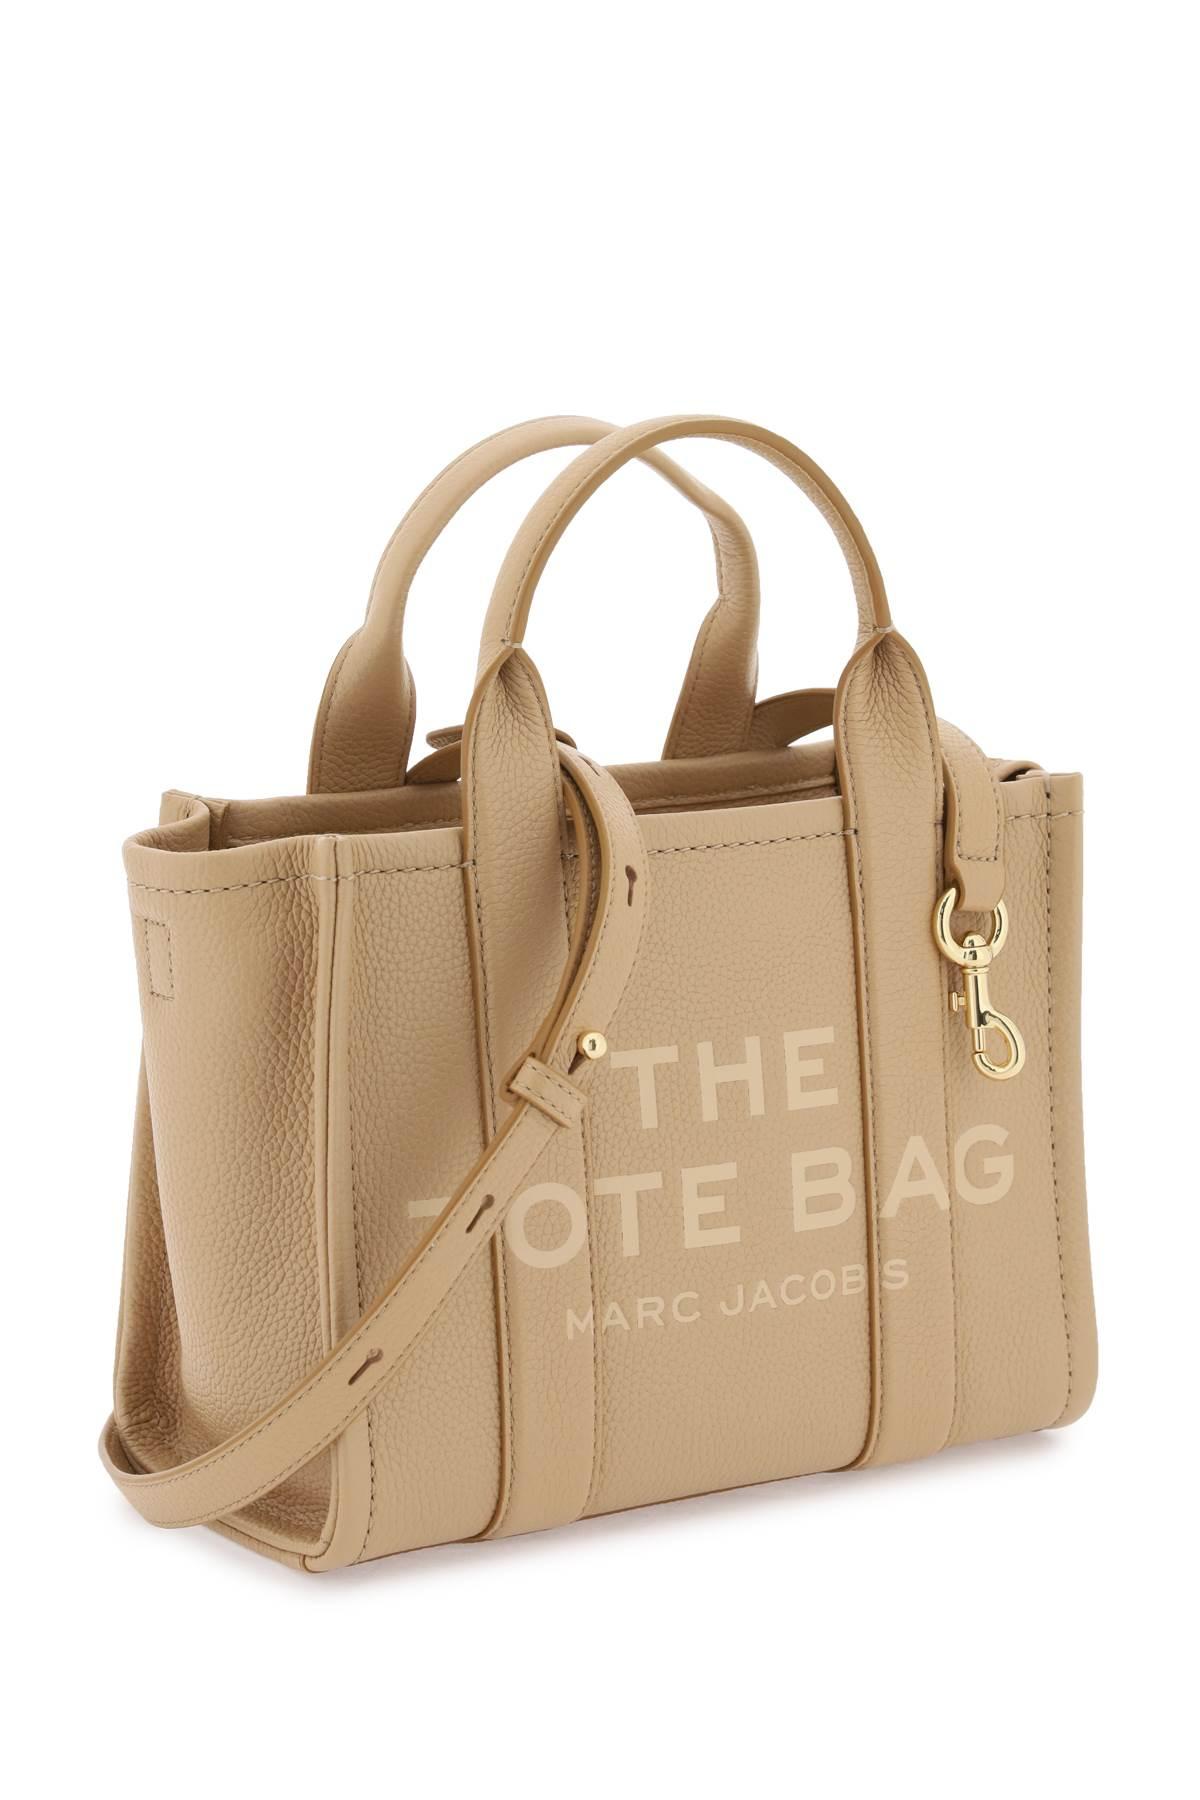 MARC JACOBS The Tote Bag  Comparison of the Small, Mini, Leather & Canvas  